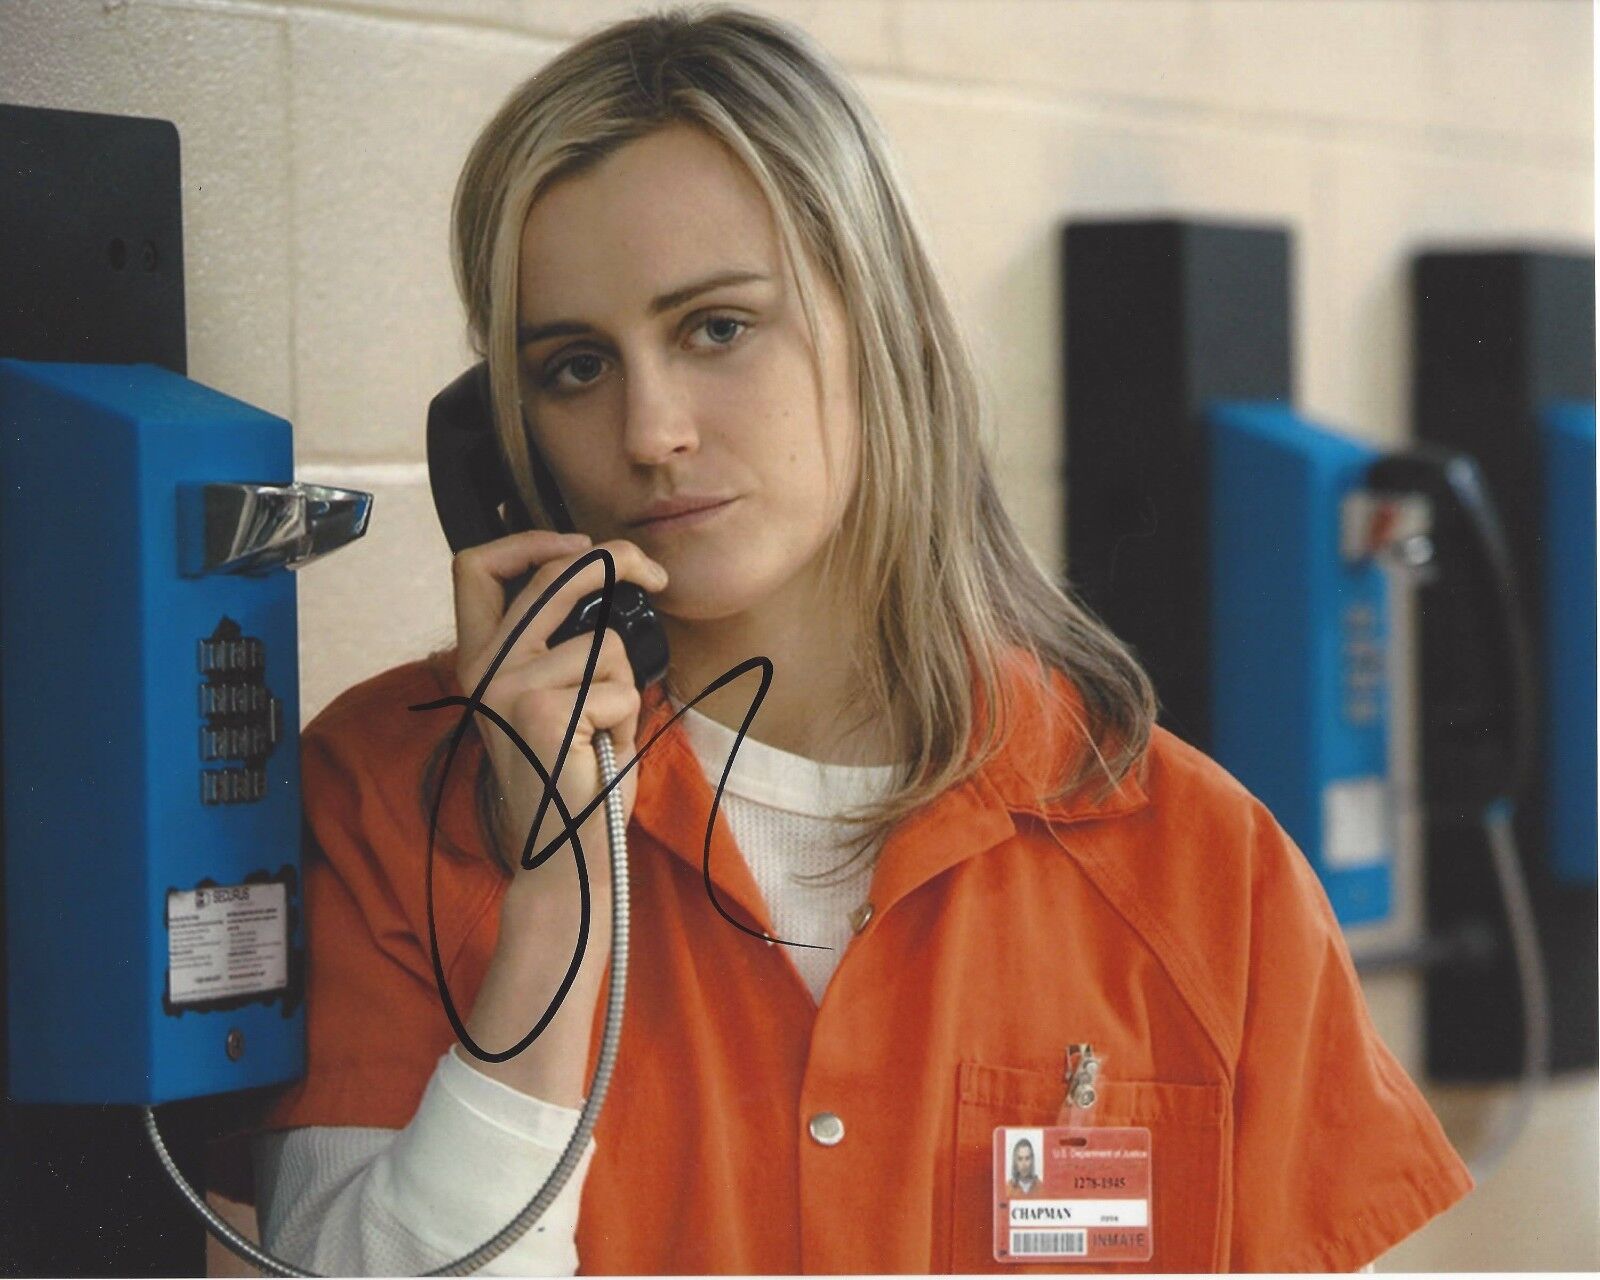 ACTRESS TAYLOR SCHILLING SIGNED ORANGE IS THE NEW BLACK 8X10 Photo Poster painting W/COA